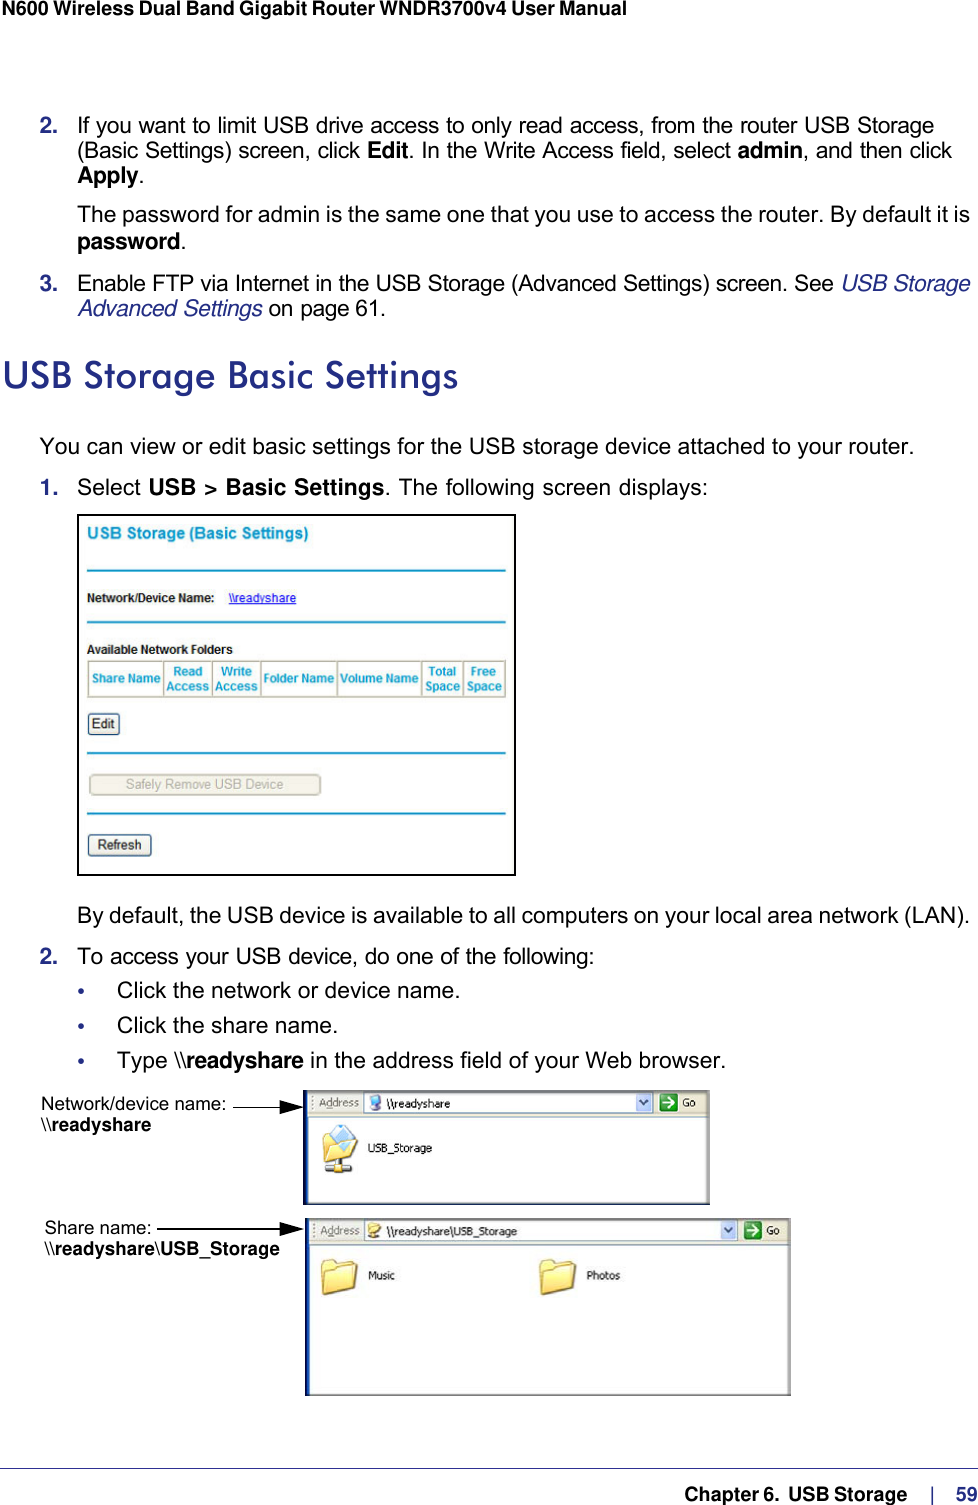   Chapter 6.  USB Storage     |    59N600 Wireless Dual Band Gigabit Router WNDR3700v4 User Manual 2.  If you want to limit USB drive access to only read access, from the router USB Storage (Basic Settings) screen, click Edit. In the Write Access field, select admin, and then click Apply.The password for admin is the same one that you use to access the router. By default it is password.3.  Enable FTP via Internet in the USB Storage (Advanced Settings) screen. See USB Storage Advanced Settings on page 61.USB Storage Basic SettingsYou can view or edit basic settings for the USB storage device attached to your router. 1.  Select USB &gt; Basic Settings. The following screen displays:By default, the USB device is available to all computers on your local area network (LAN). 2.  To access your USB device, do one of the following:•     Click the network or device name.•     Click the share name.•     Type \\readyshare in the address field of your Web browser.Network/device name:Share name:\\readyshare\\readyshare\USB_Storage